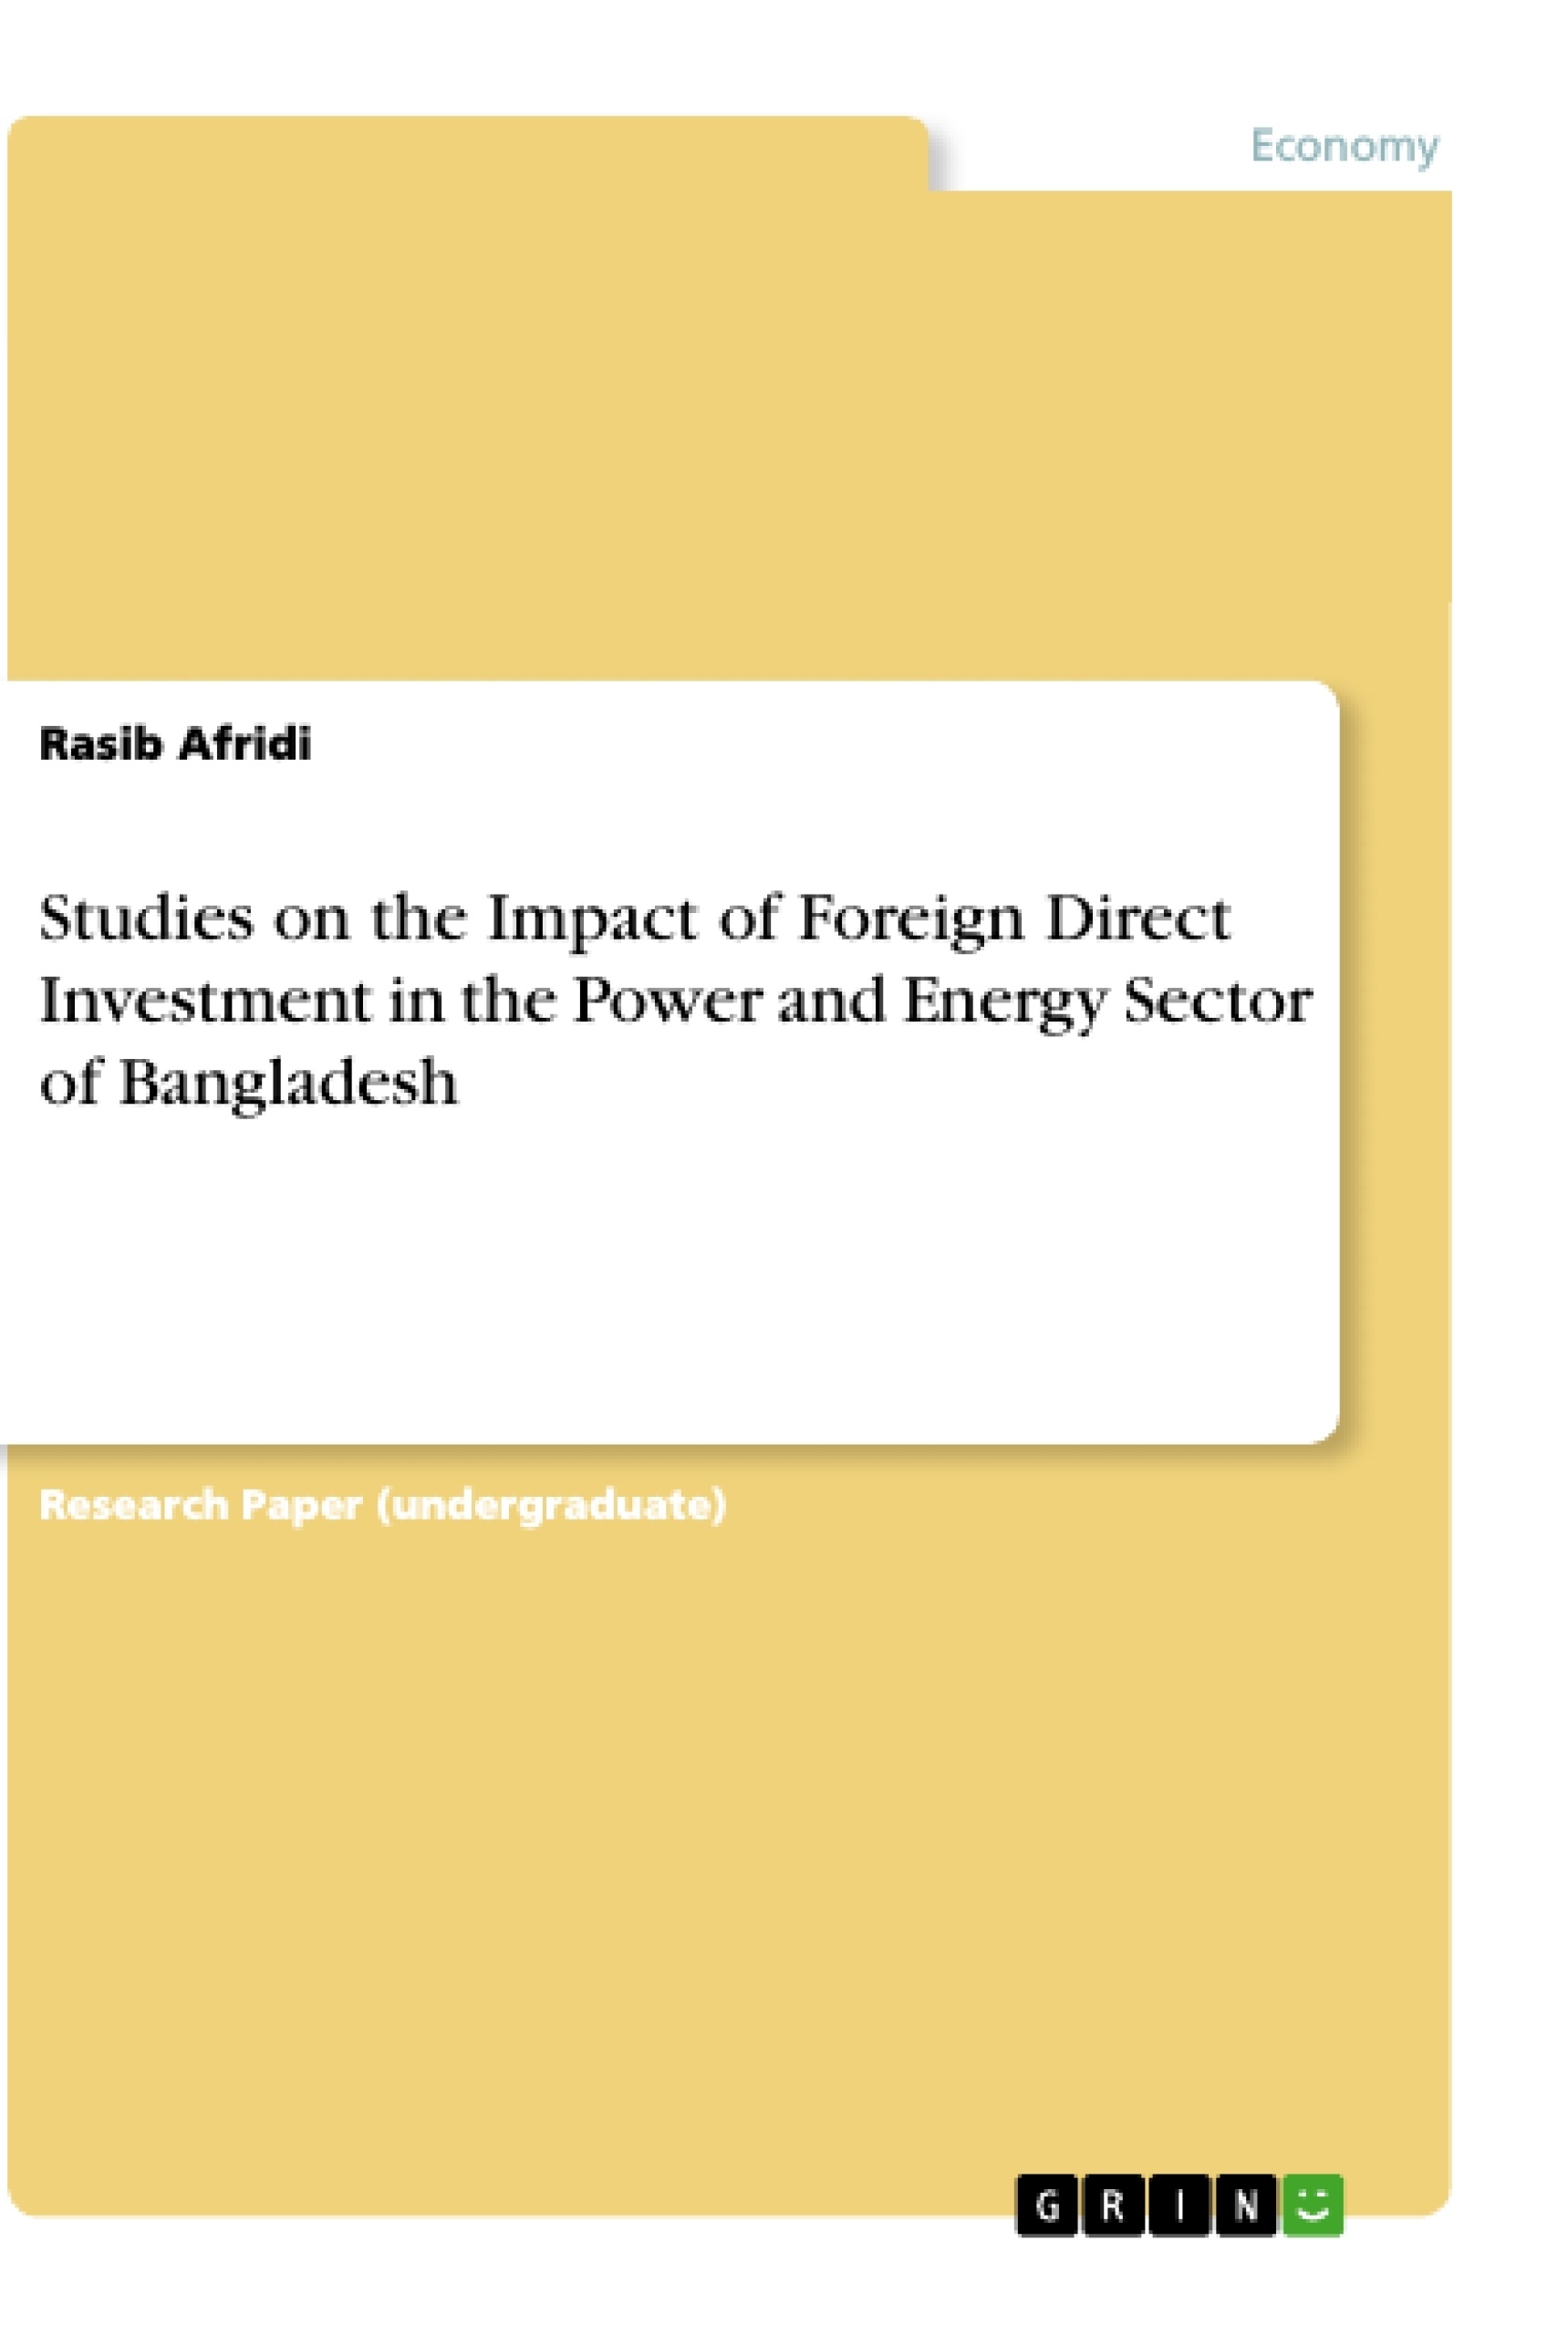 Title: Studies on the Impact of Foreign Direct Investment in the Power and Energy Sector of Bangladesh